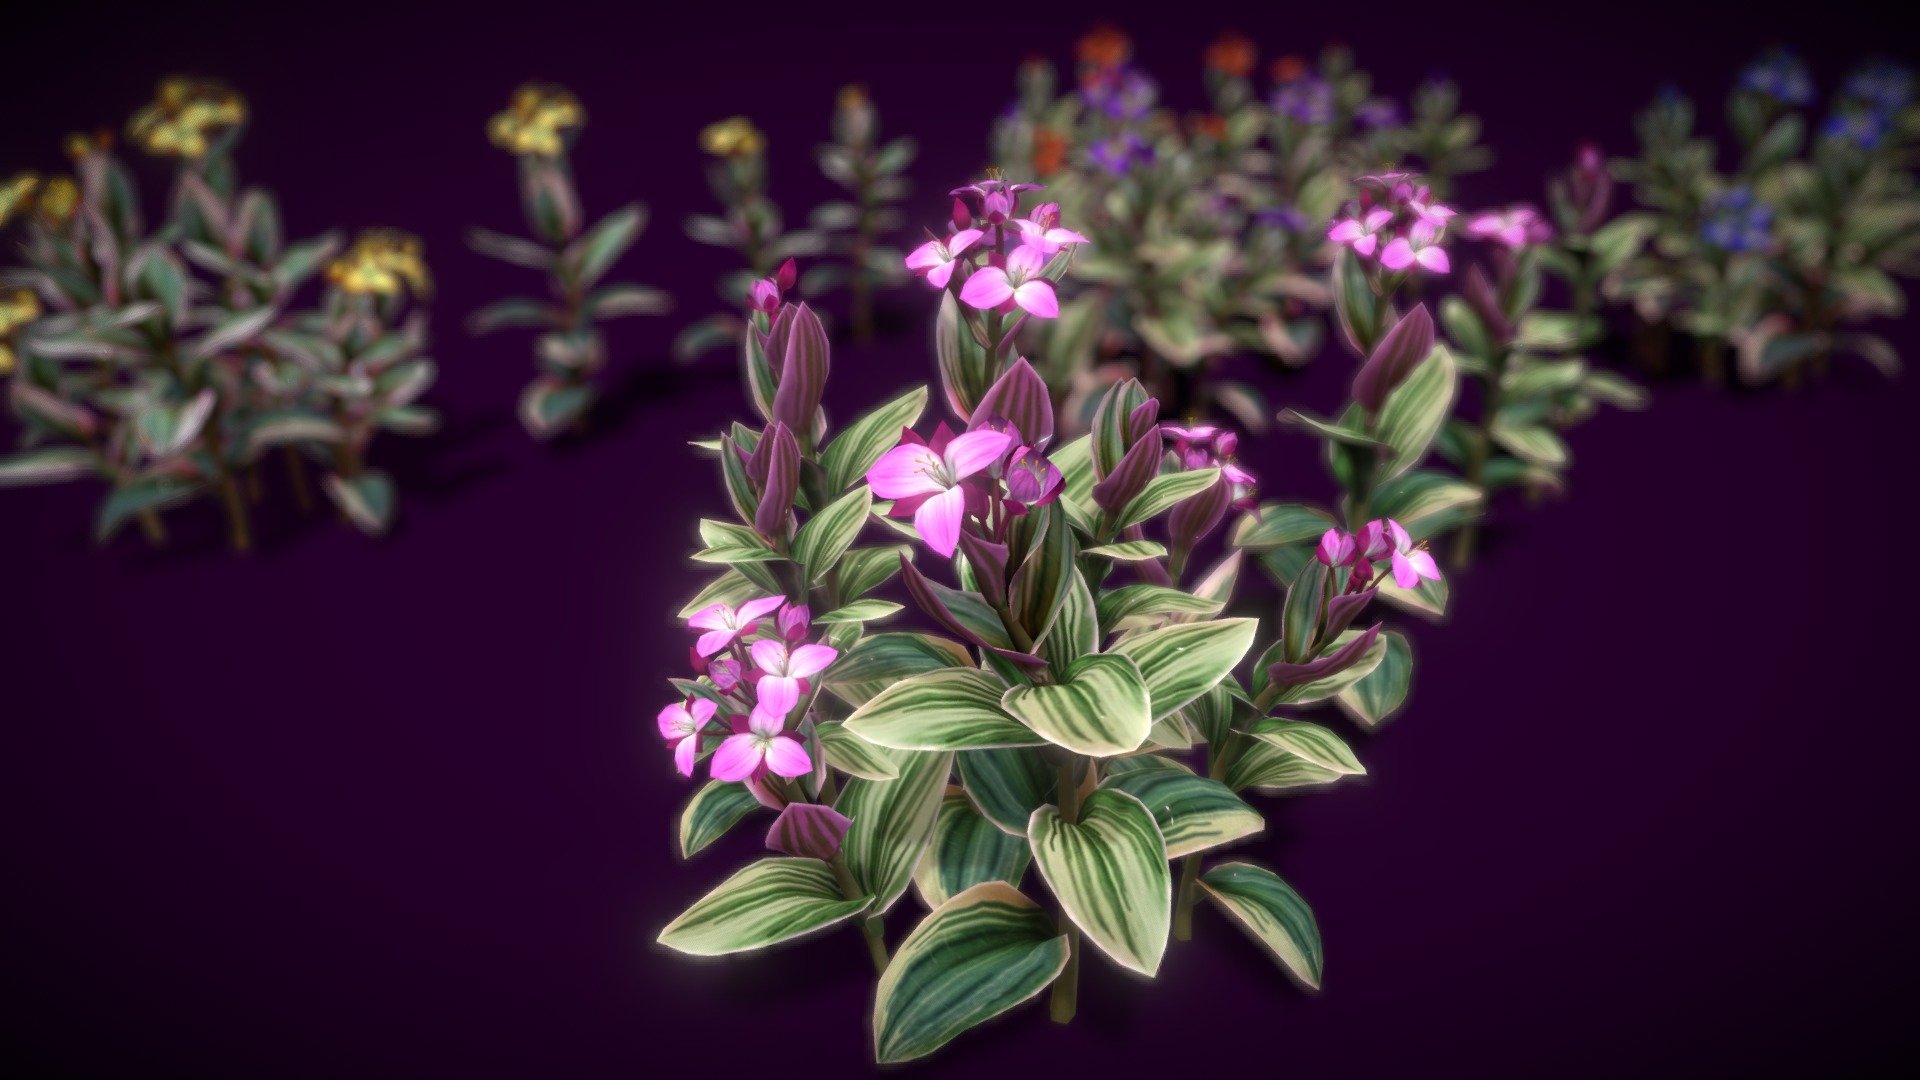 HIGH QUALITY Flower optimized for Unity game engine!
Mobile Optimize Scene This is model 3D Flower Tradescantia Nanouk in the Big Pack (Cartoon Flower Colections) with over 5 types color!
All objects are ready to use in your visualizations. 
-1024x1024, texture maps 
-Poly Count : Average 39988polys 73640 tris/39257 vert - Flower Tradescantia Nanouk - Buy Royalty Free 3D model by vustudios 3d model